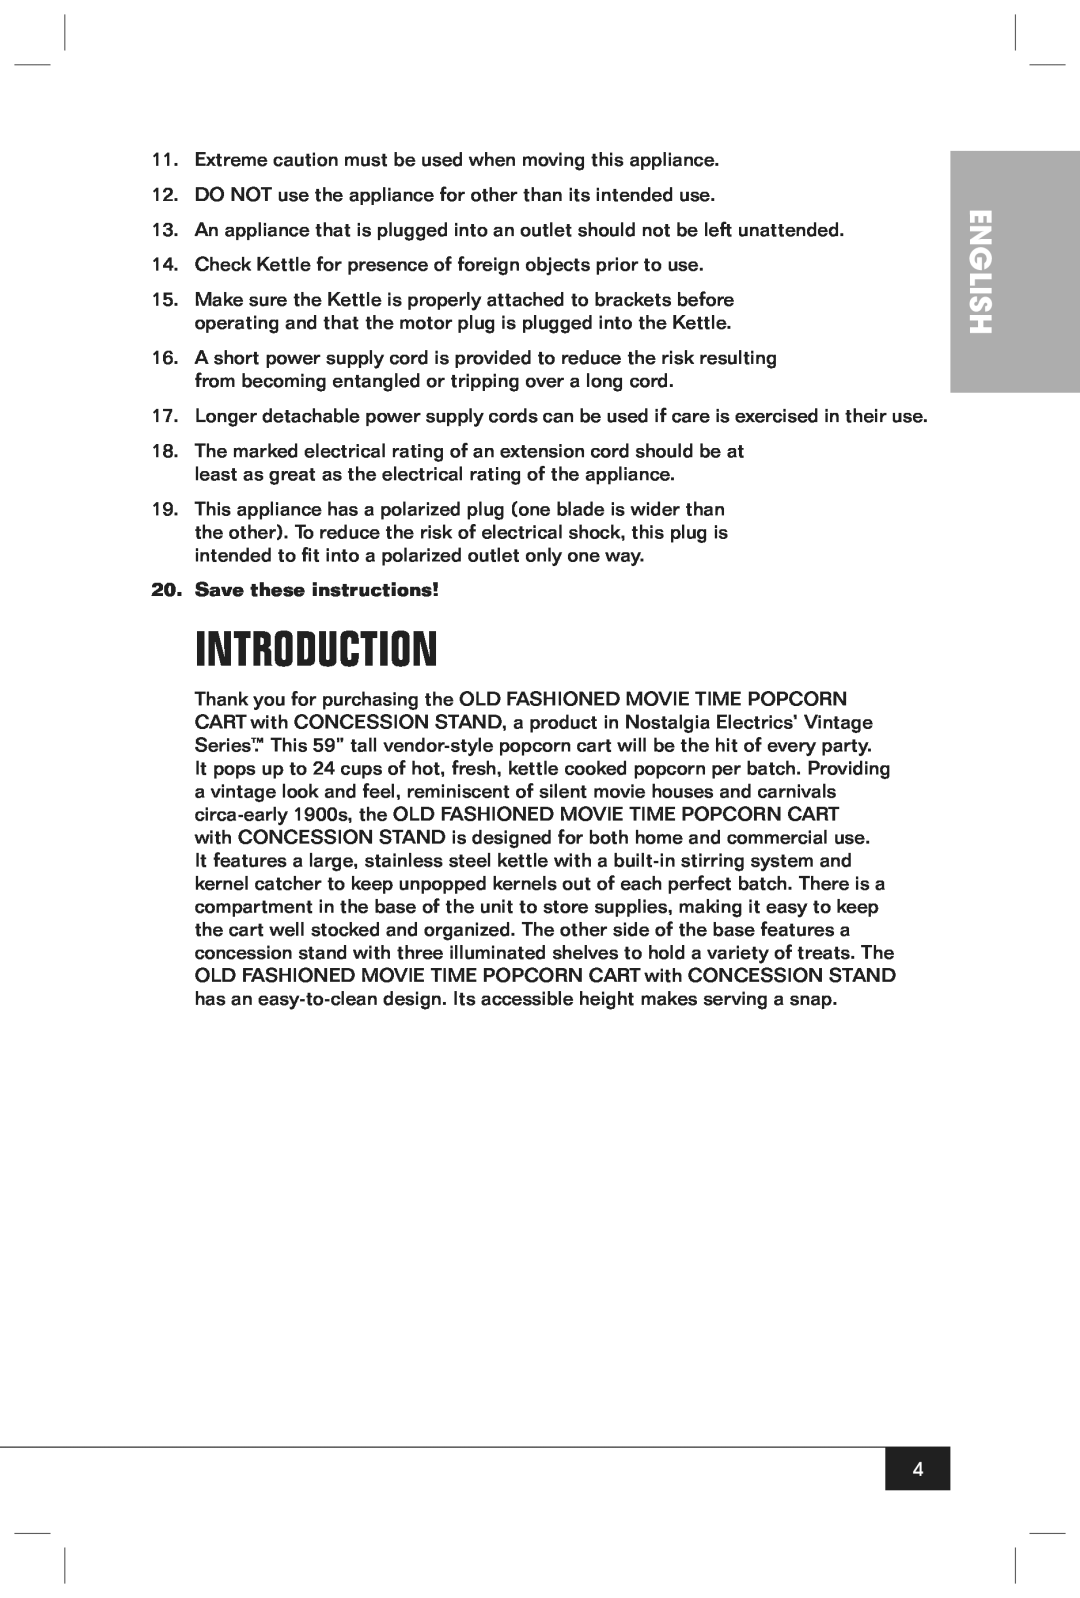 Nostalgia Electrics CCP610 manual Introduction, English, Save these instructions 